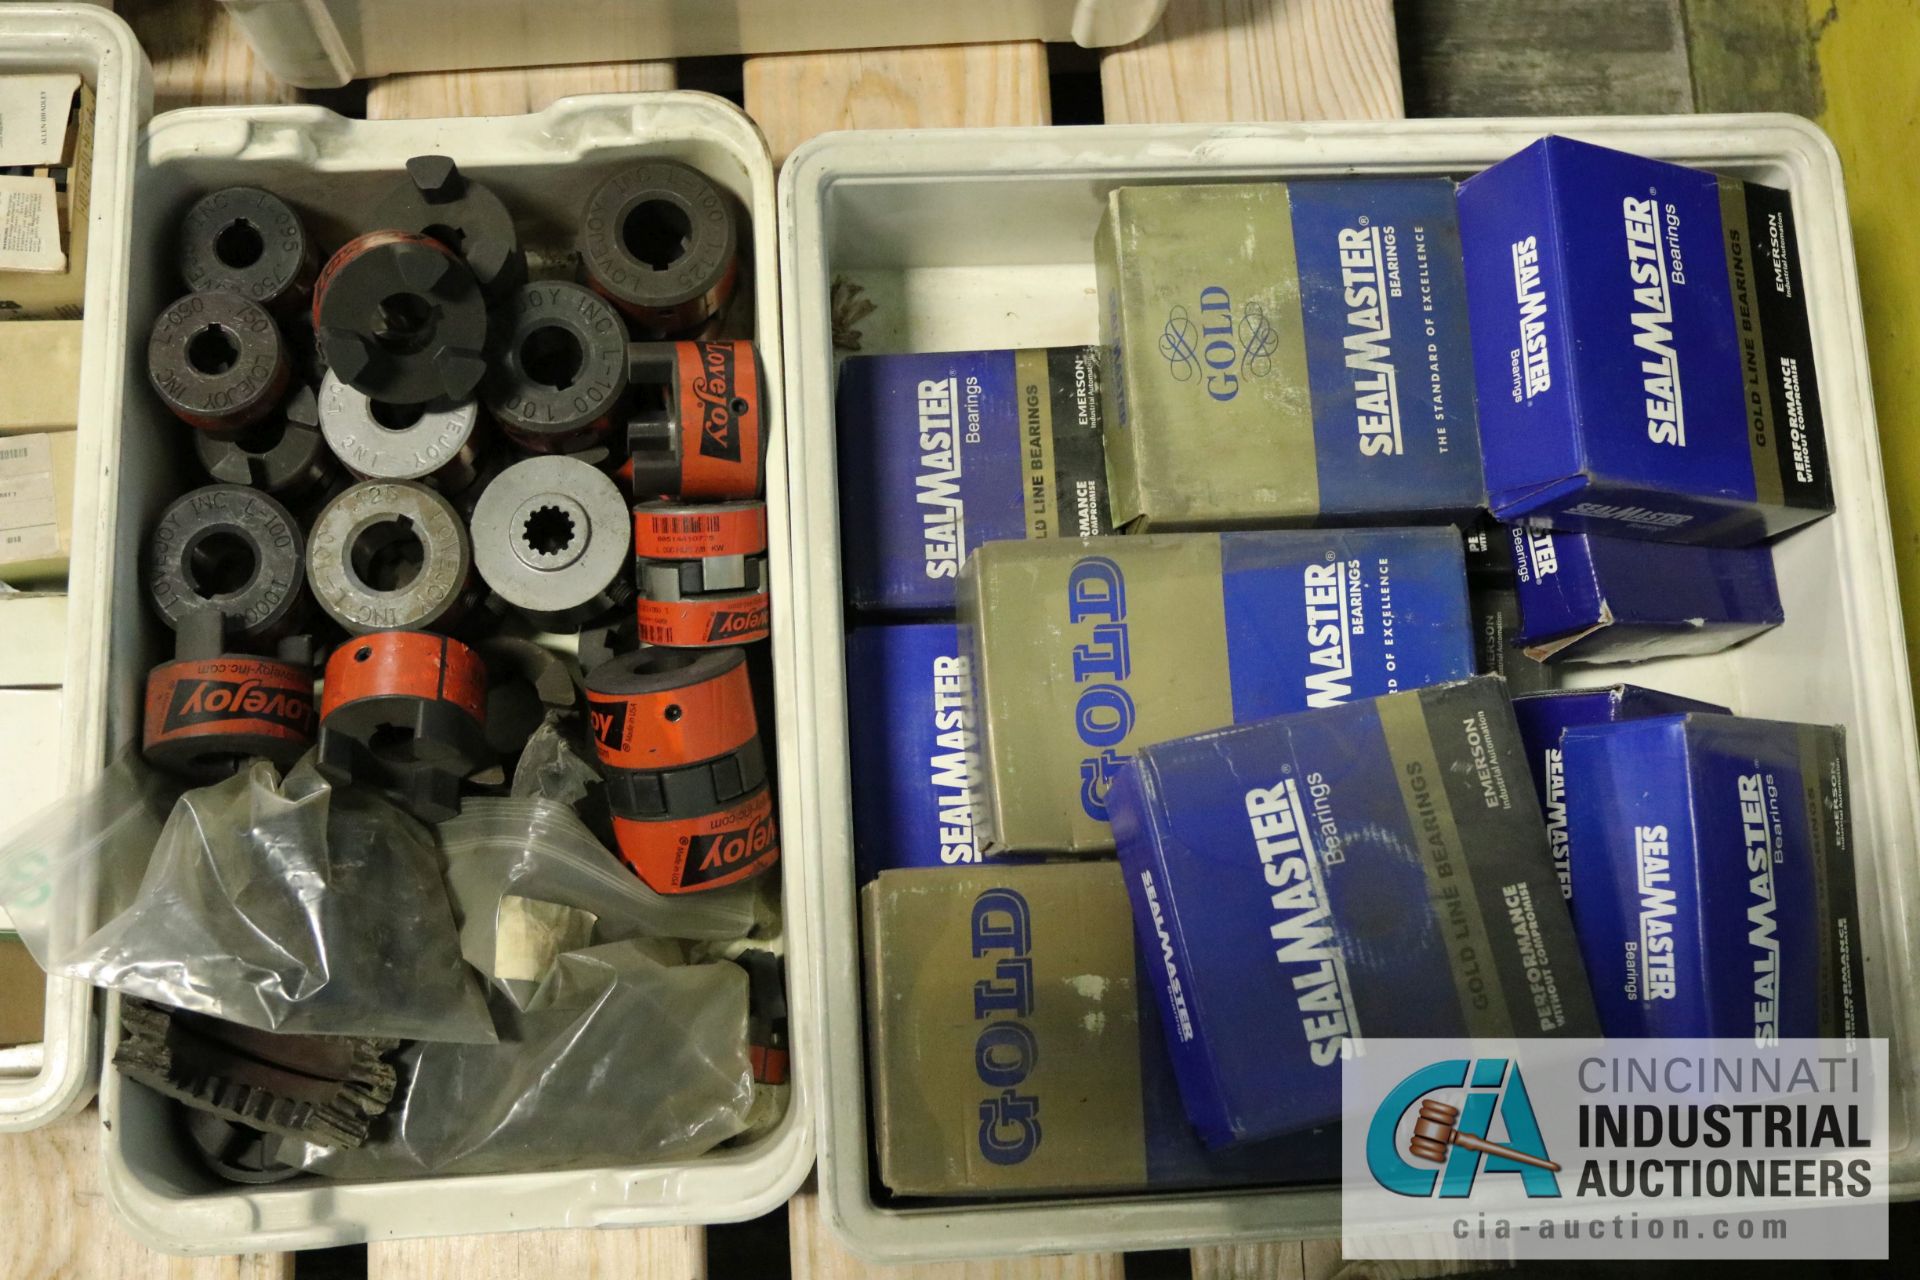 PALLET OF NOS BEARINGS & PARTS - $10.00 Rigging Fee Due to Onsite Rigger - Located in Bryan, Ohio - Image 4 of 5